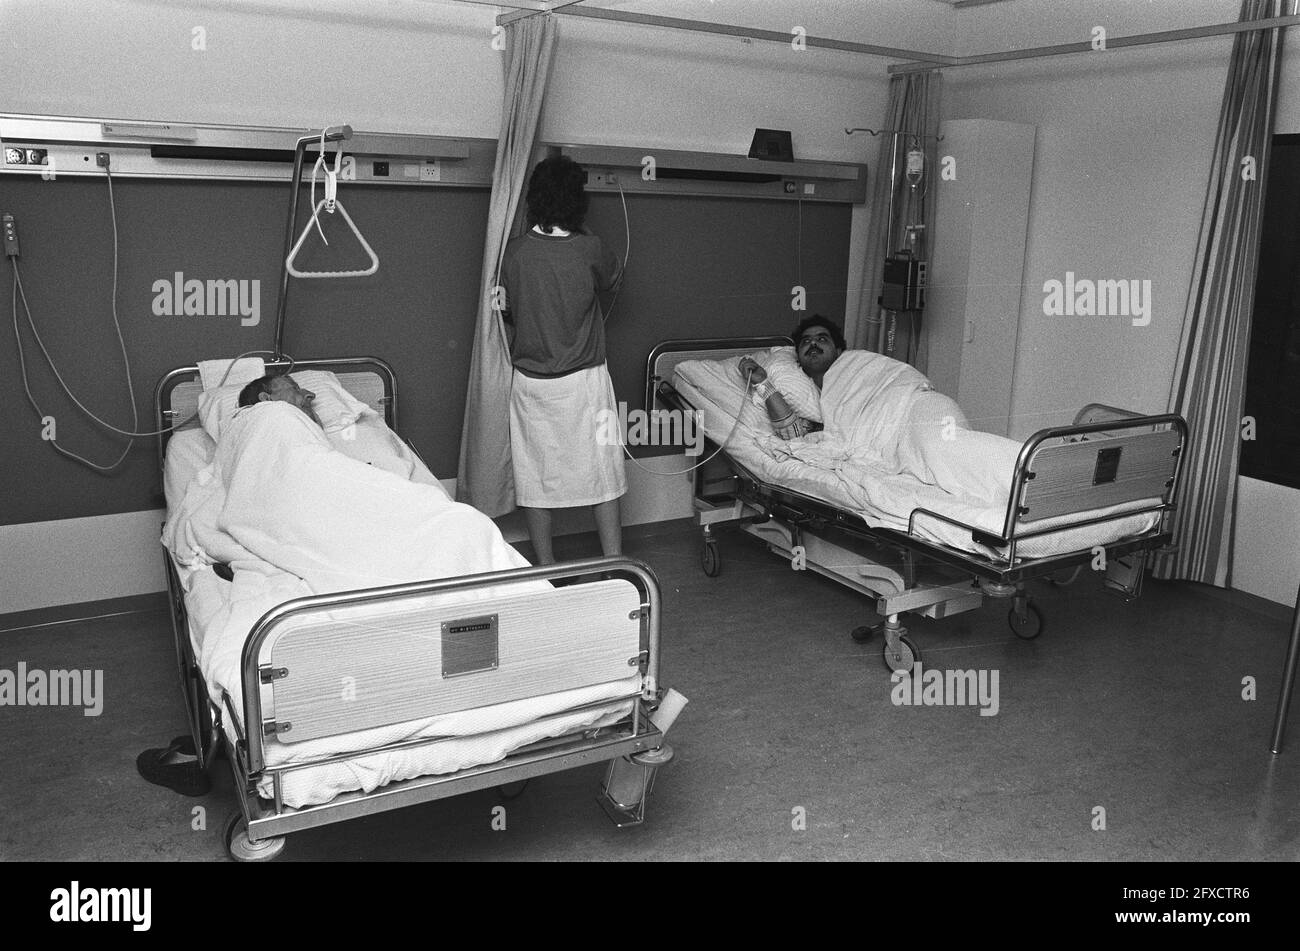 Patients move in special cars to the new building of the Academic Hospital in Leiden; patients in their new hospital room, December 17, 1985, NEWBOUW, PATIENTS, moves, hospitals, The Netherlands, 20th century press agency photo, news to remember, documentary, historic photography 1945-1990, visual stories, human history of the Twentieth Century, capturing moments in time Stock Photo